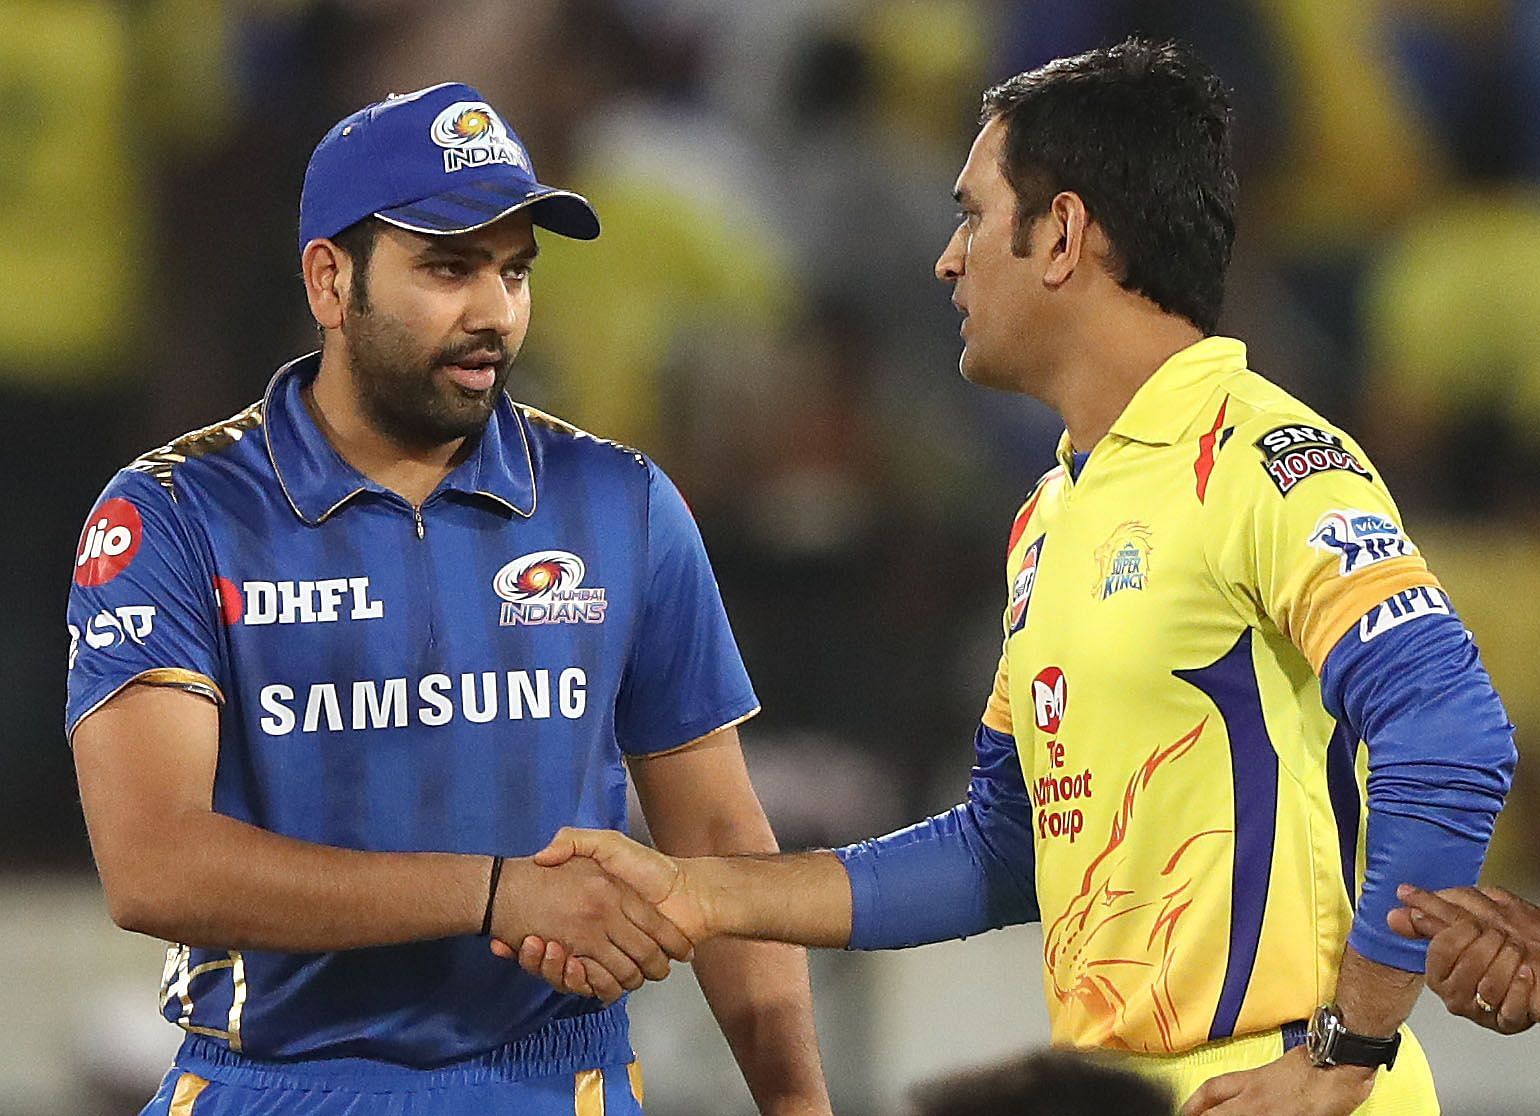 Rohit Sharma and MS Dhoni have played in all the IPL seasons